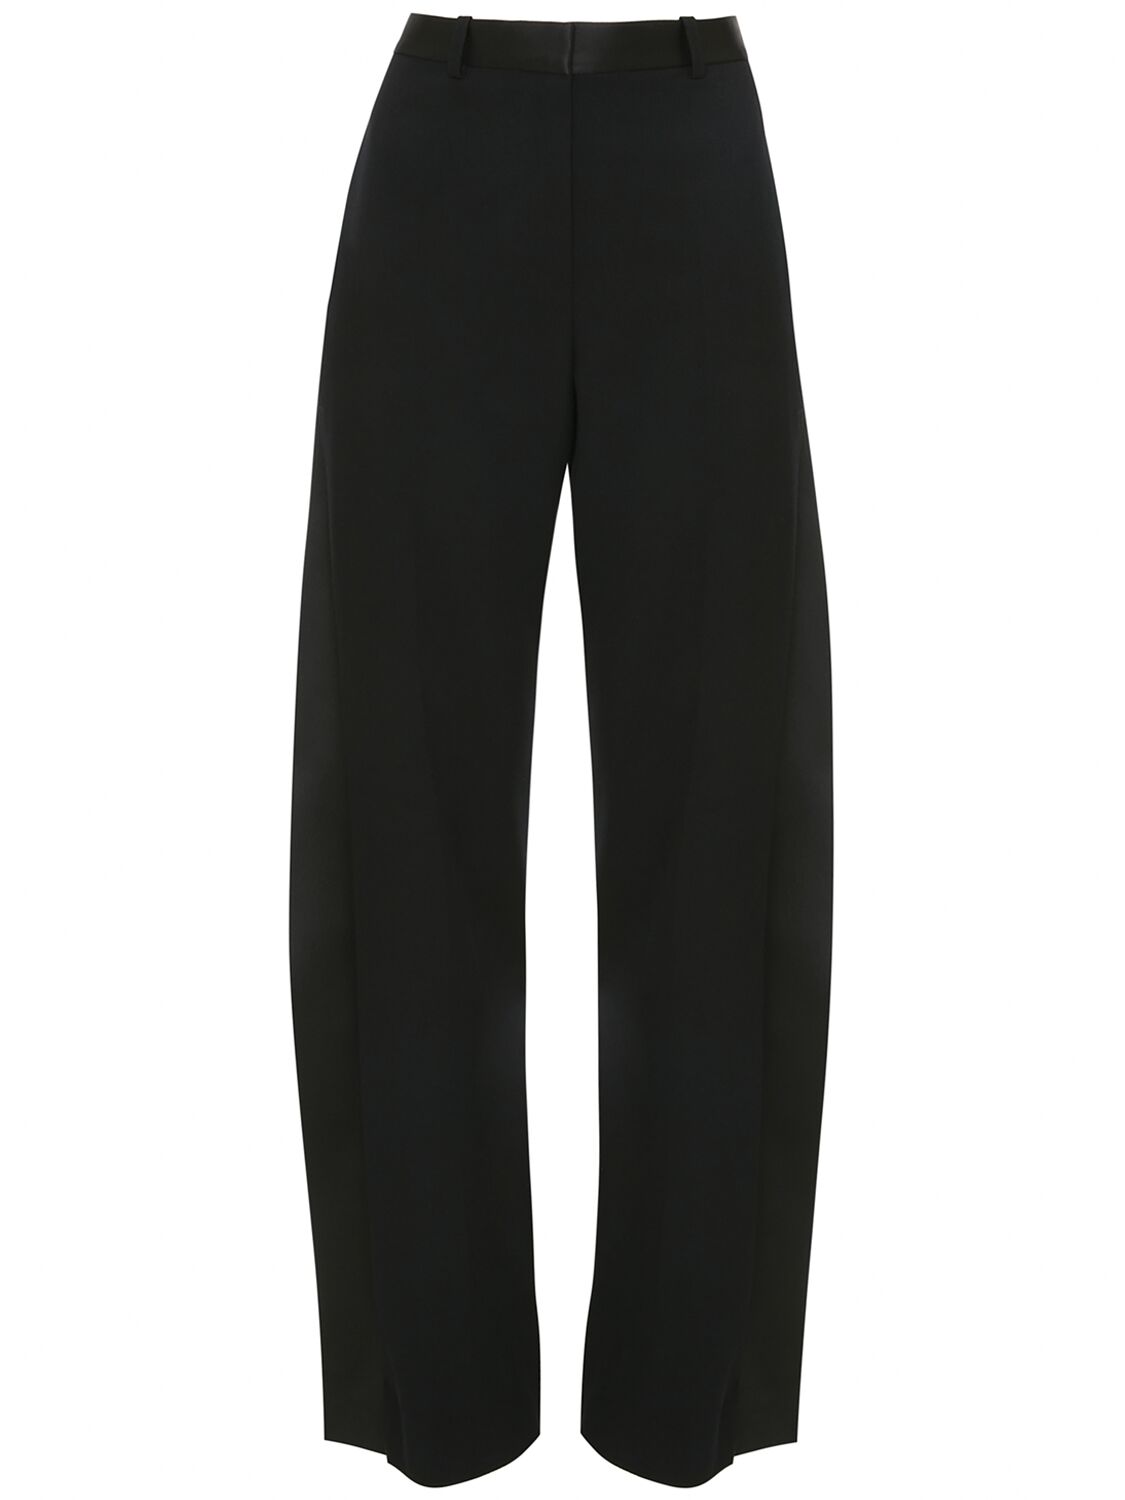 Victoria Beckham Tapered Wool Blend Pants In Black